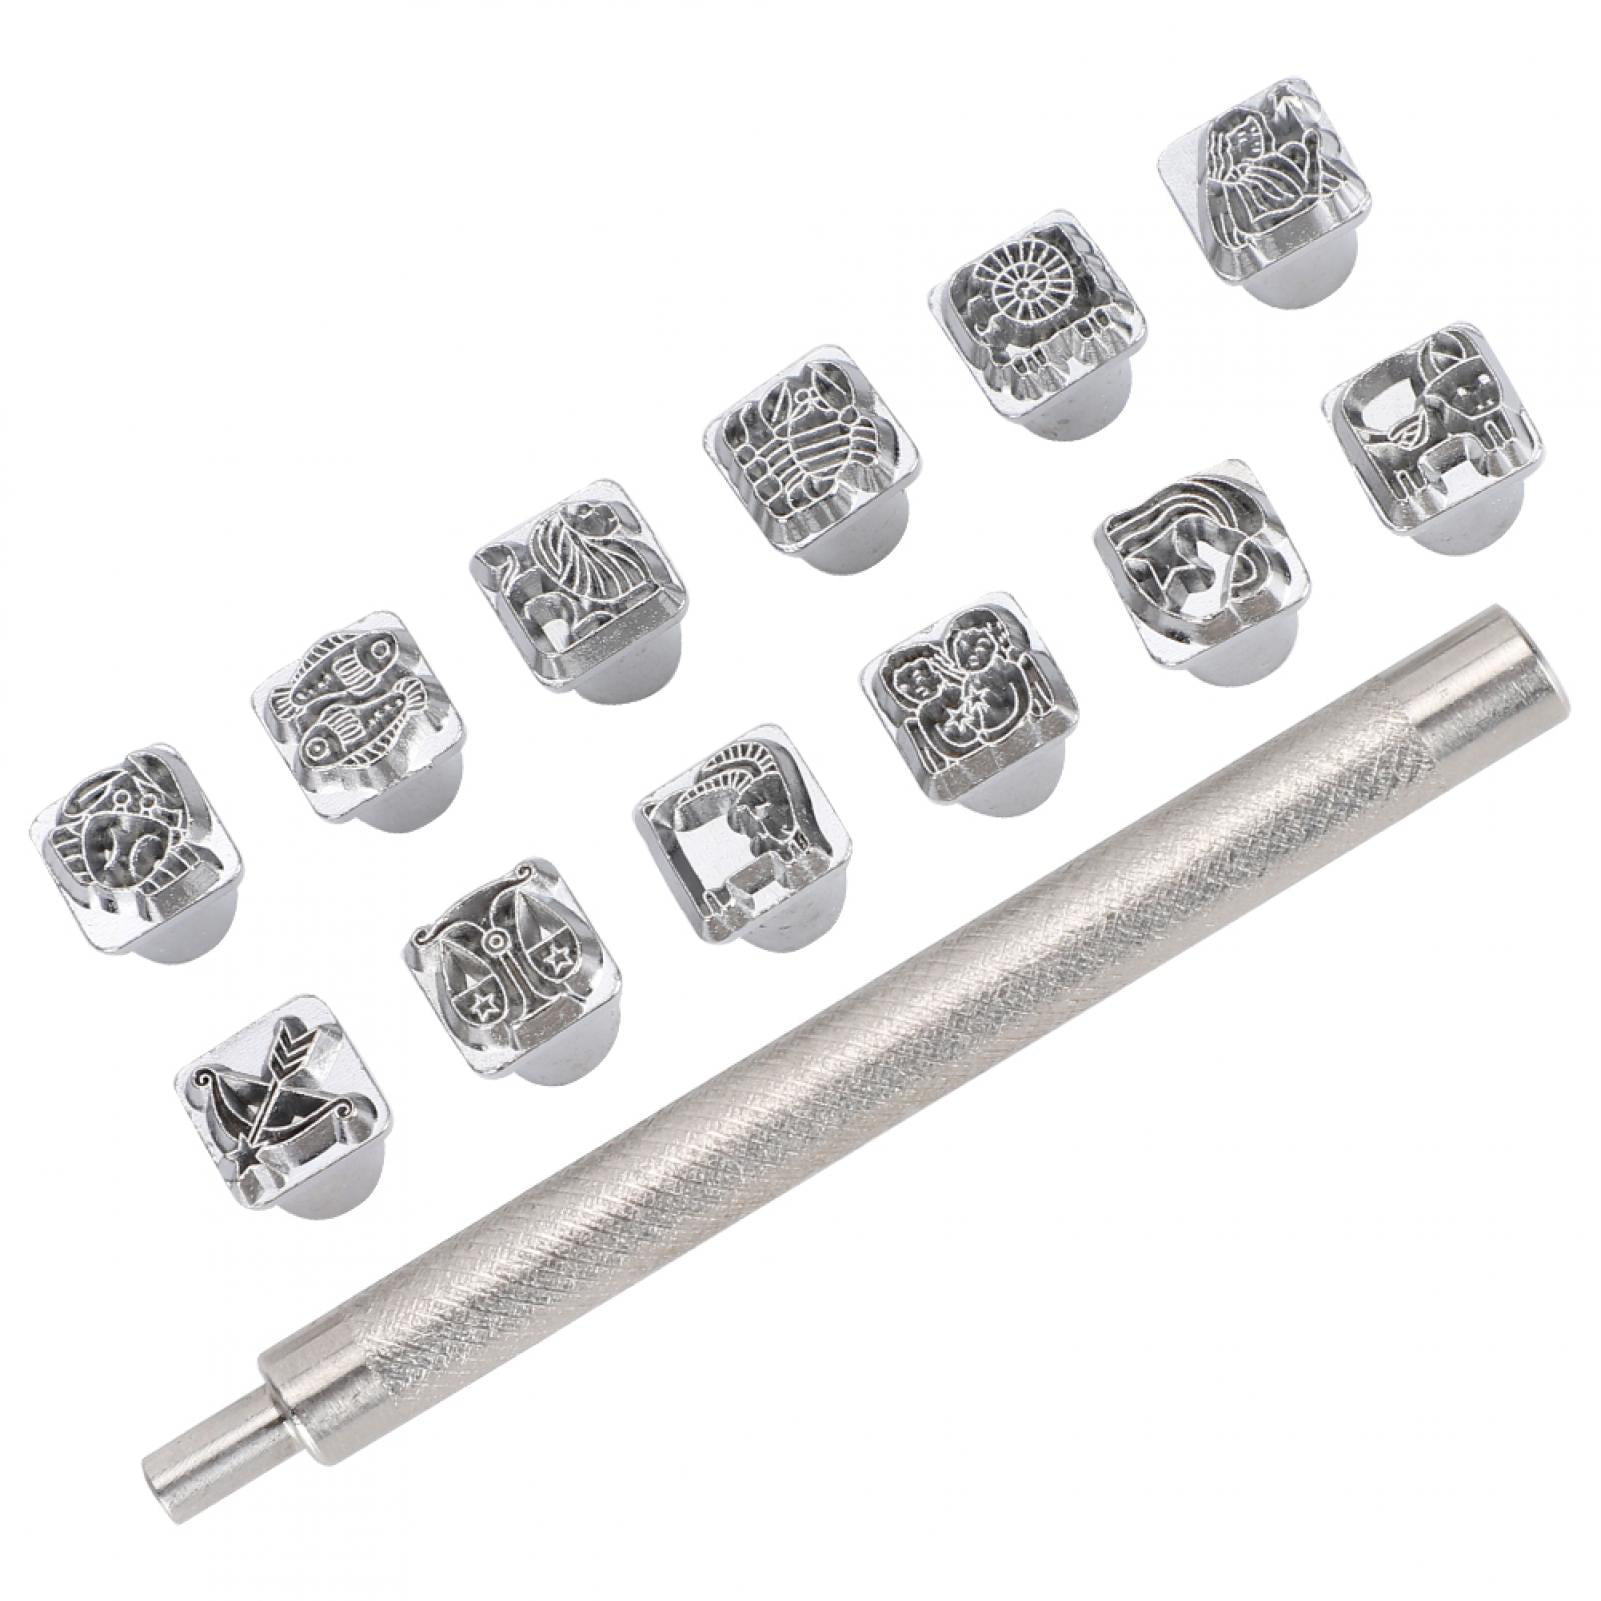 Details about   12X Stamping Punch Tool Plants Animals Pattern DIY Leather Craft Carving Stamper 